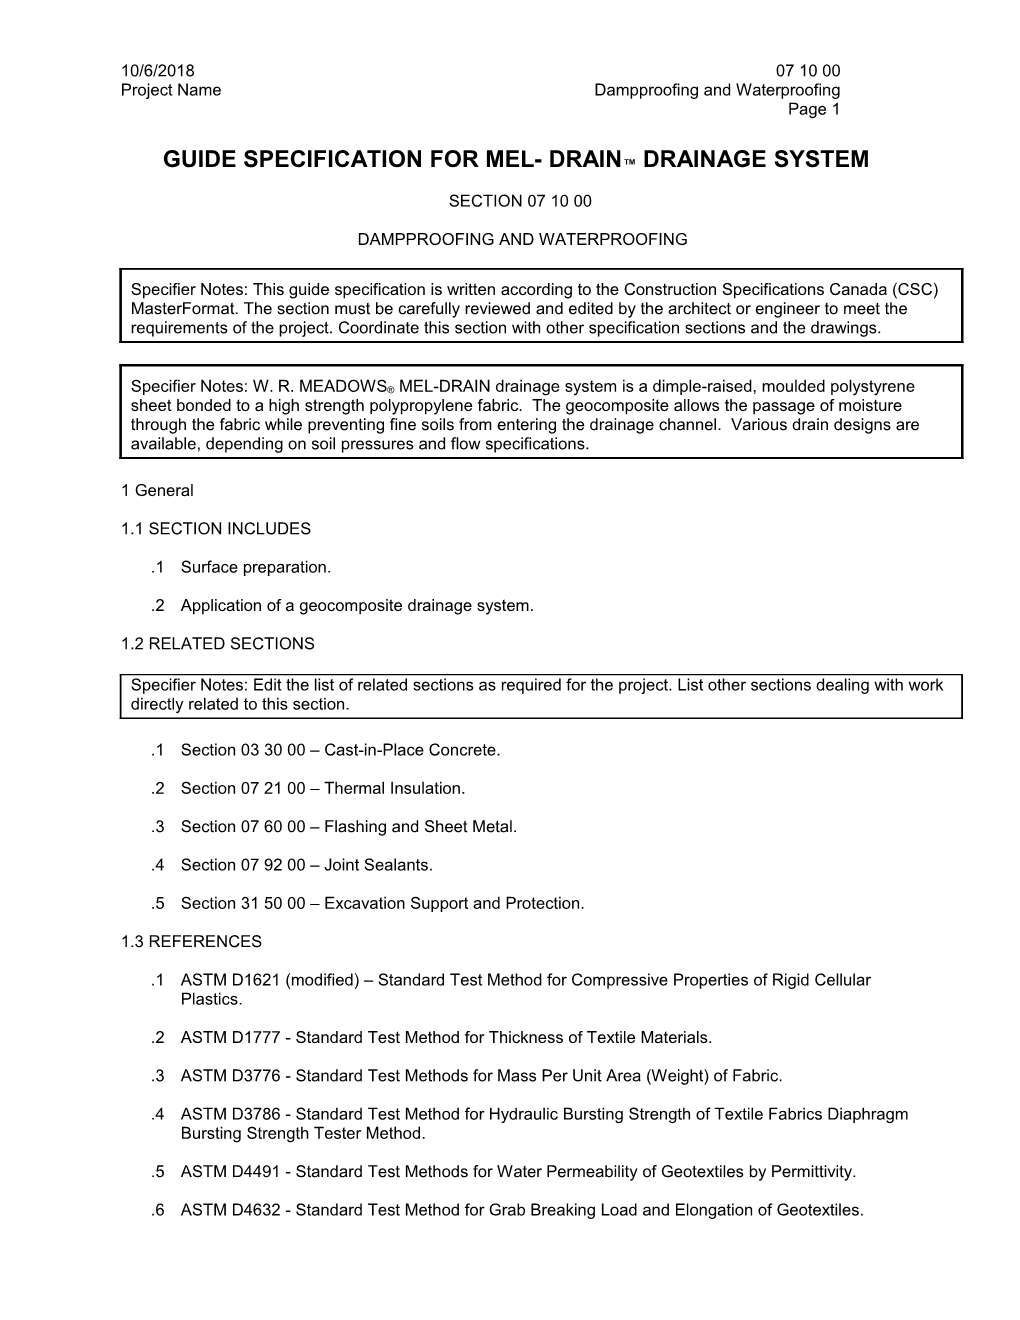 Guide Specification for Mel- Drain Drainage System